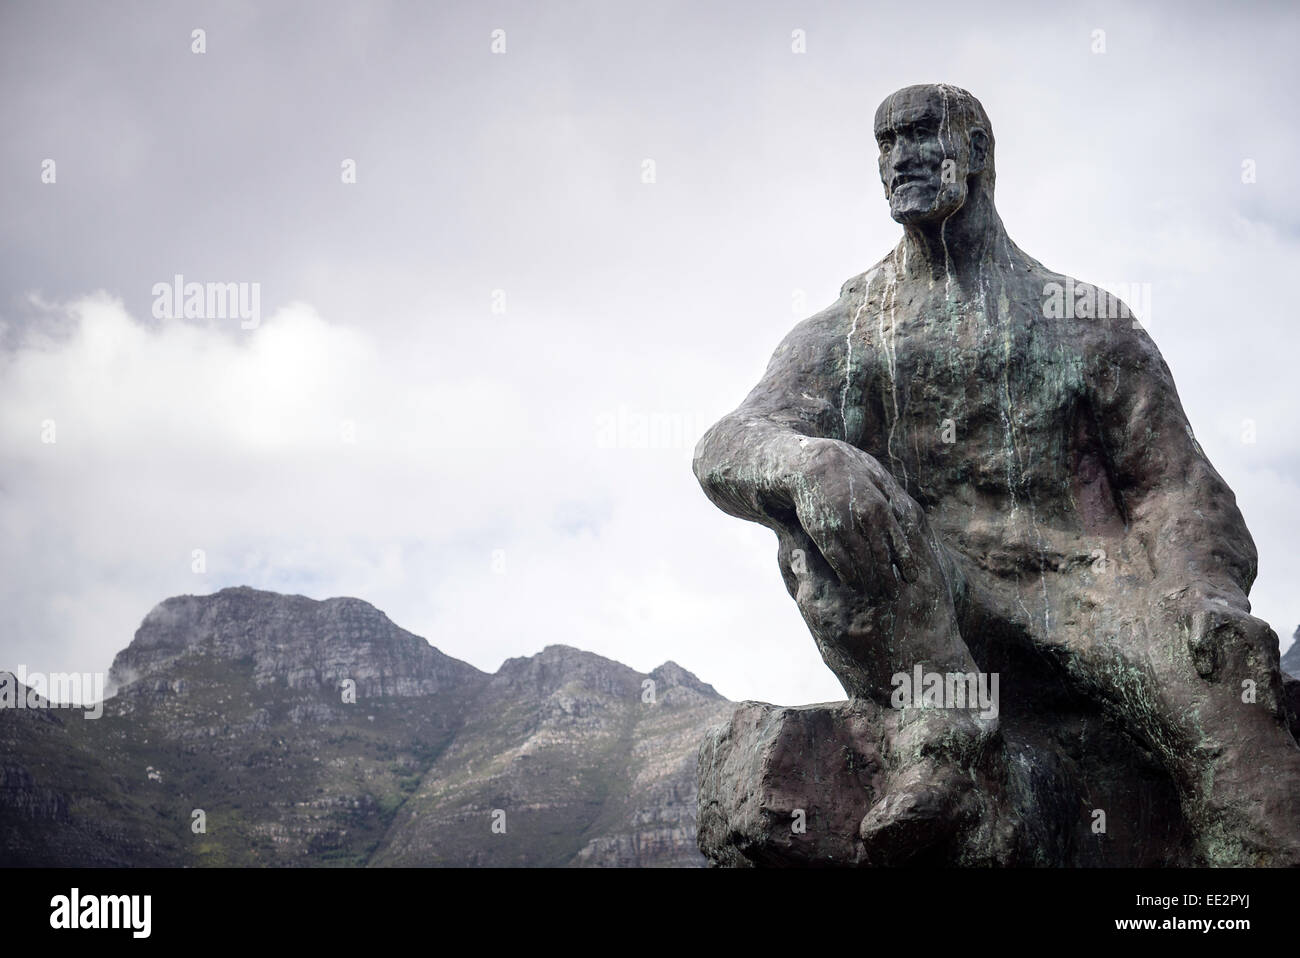 The statue of Jan Smuts in The Company's Garden, Cape Town, South Africa, with Table Mountain in the background. Stock Photo